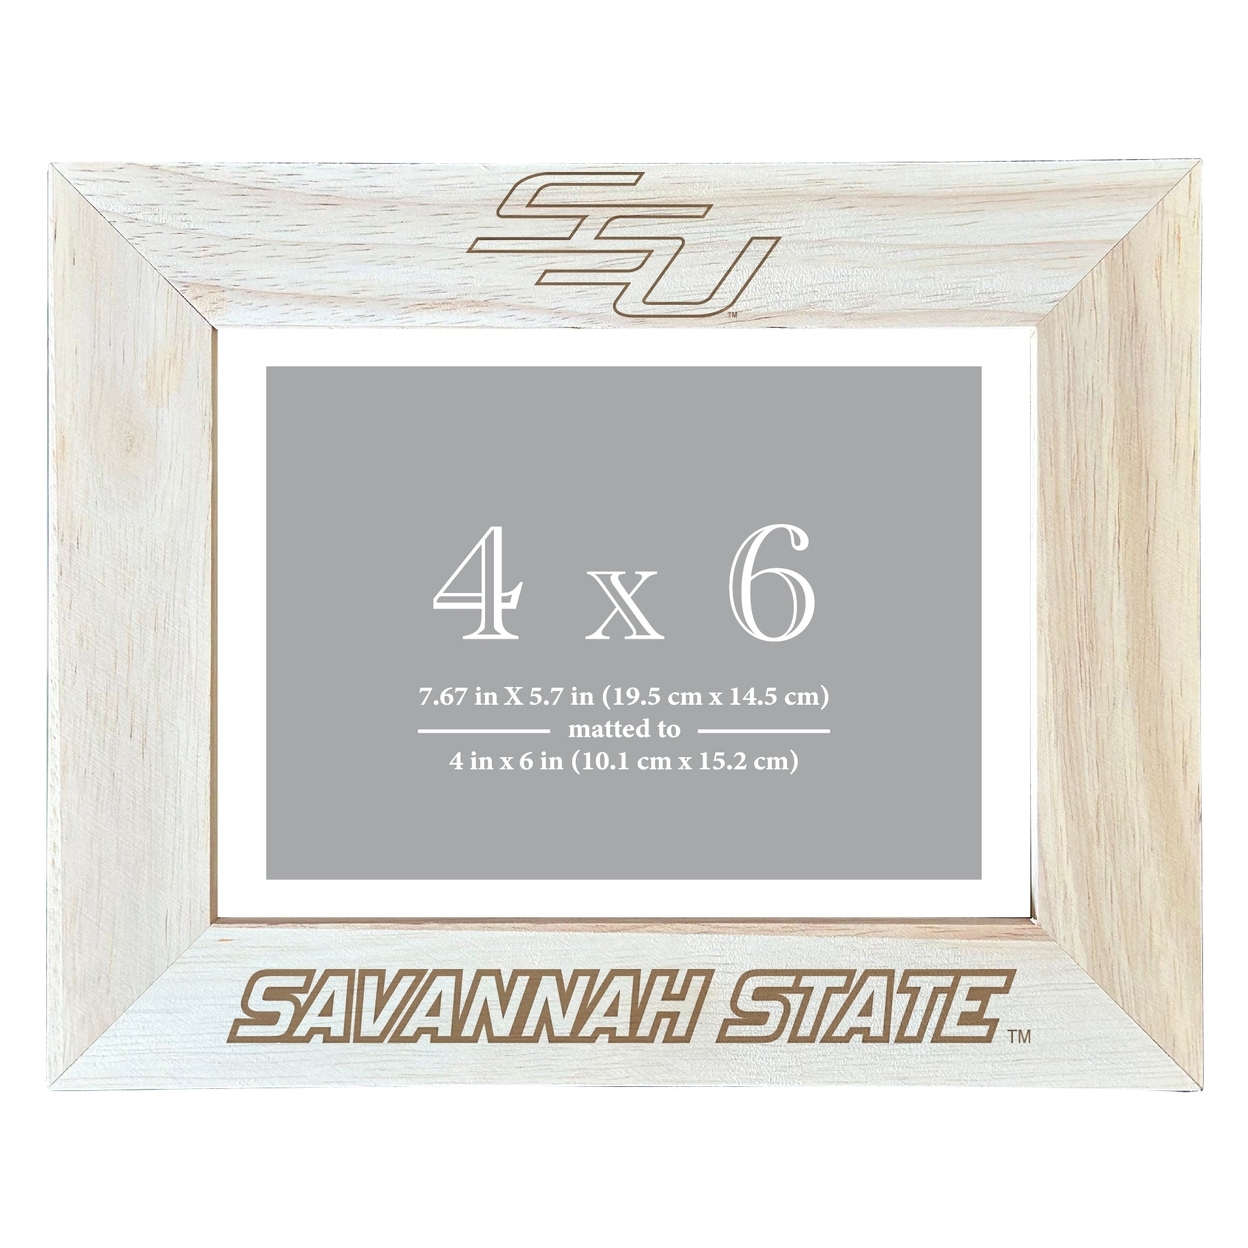 Savannah State University Wooden Photo Frame Matted To 4 X 6 Inch - Etched